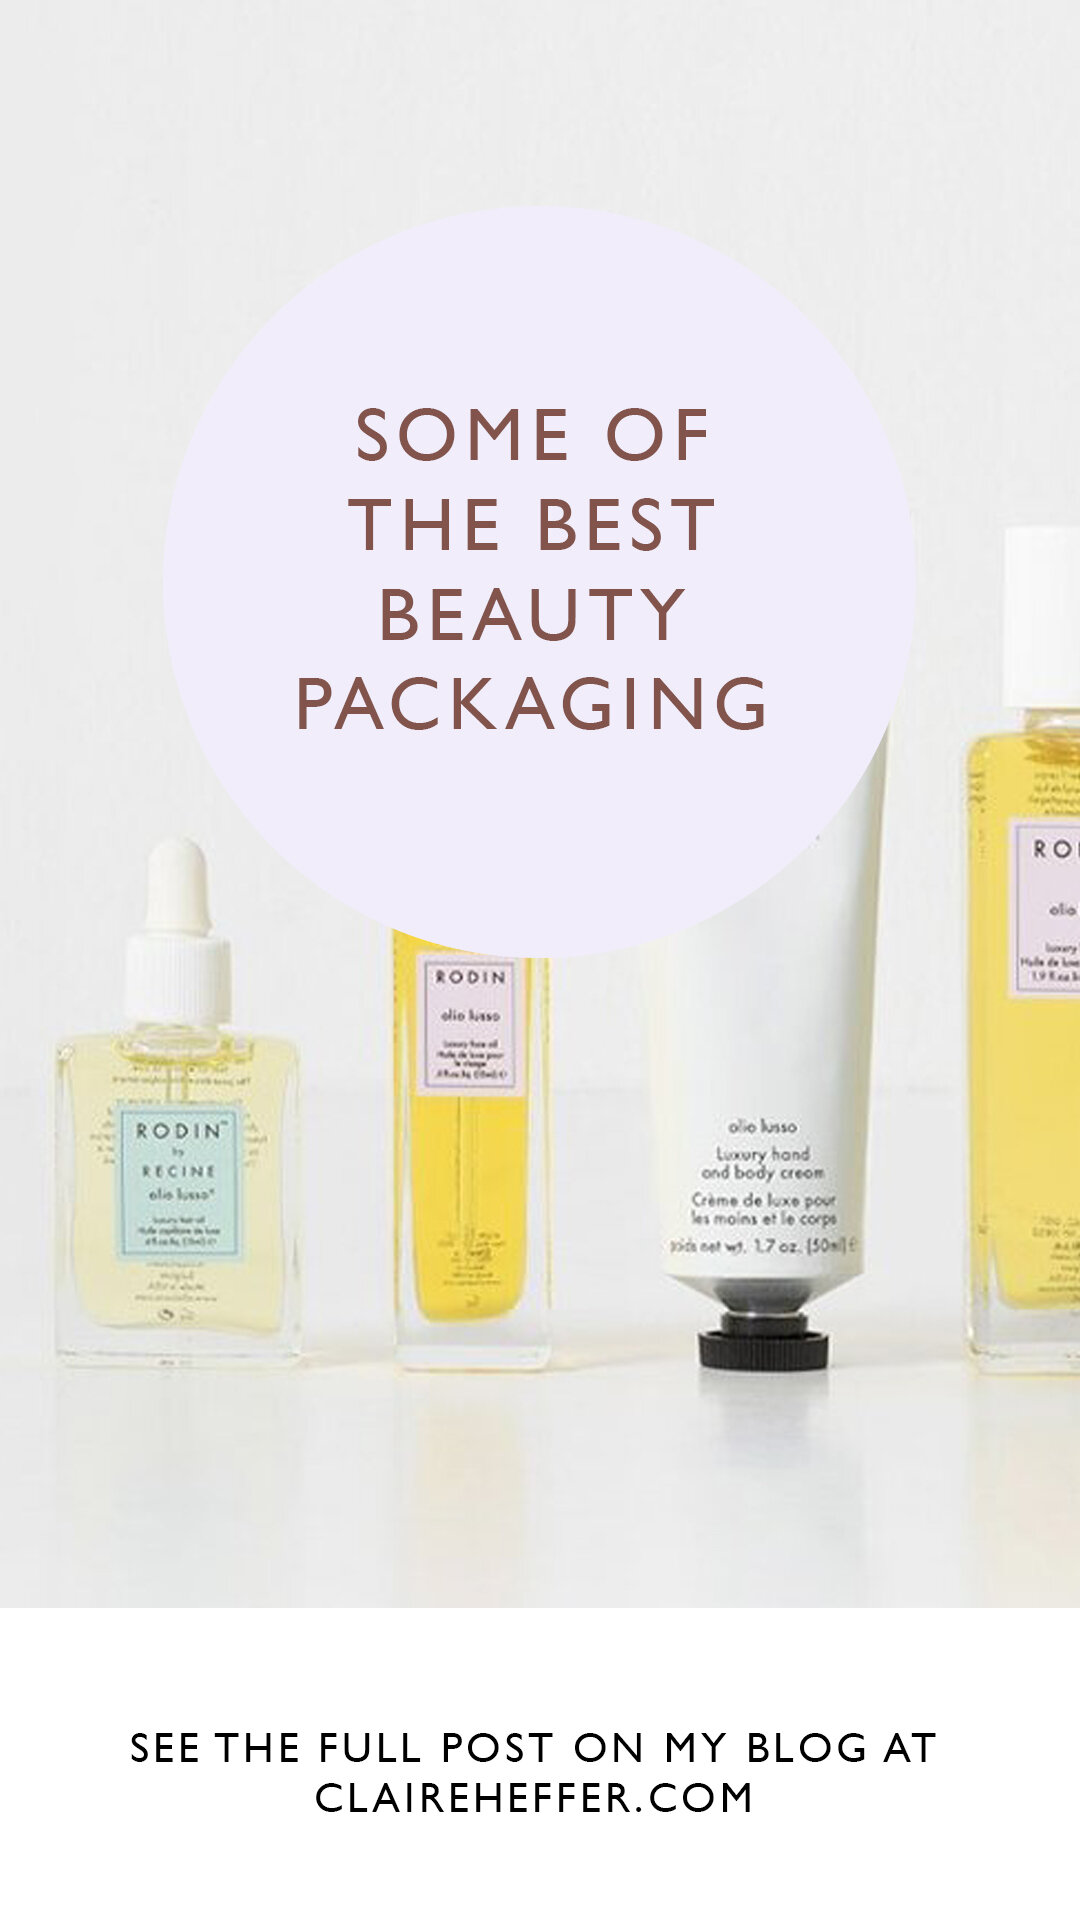 SOME OF THE MOST BEAUTIFUL BEAUTY PACKAGING2.jpg